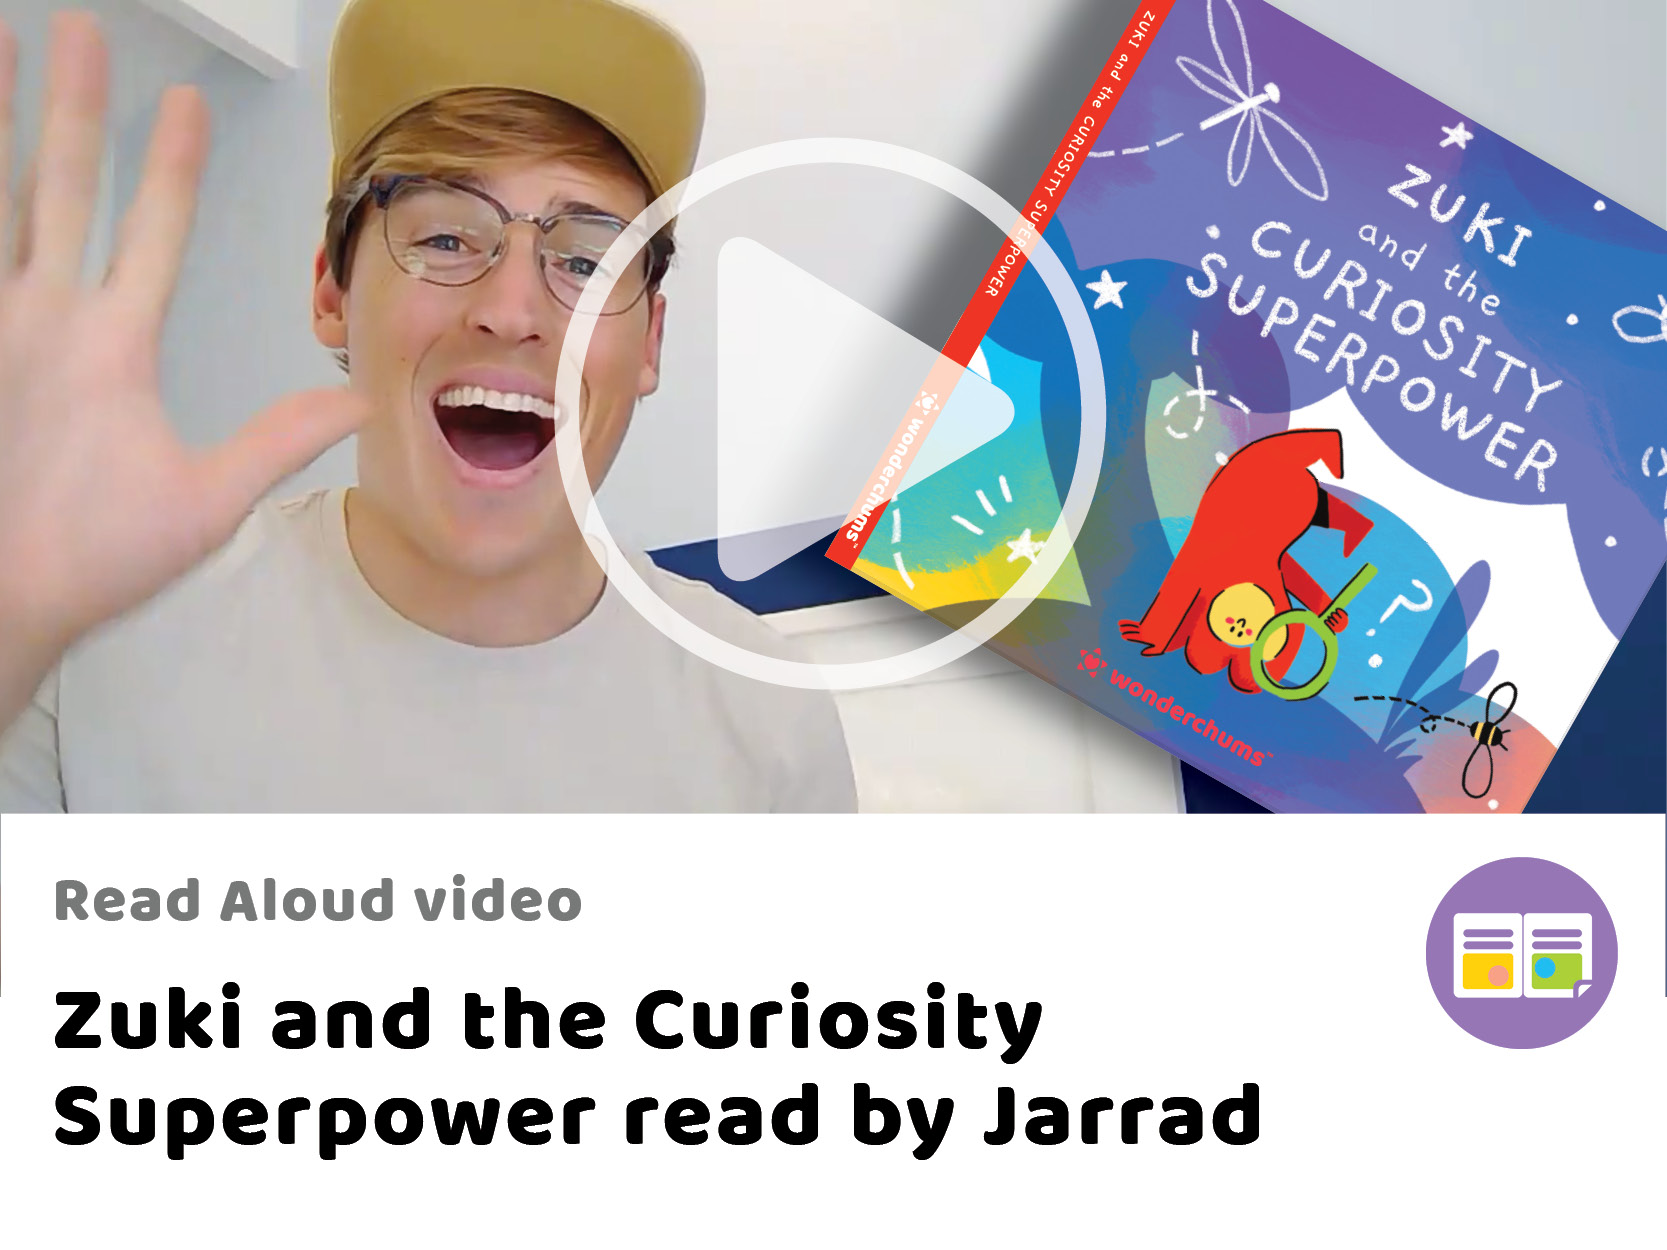 Read Aloud of "Zuki and the Curiosity Superpower" with Jarrad Dober